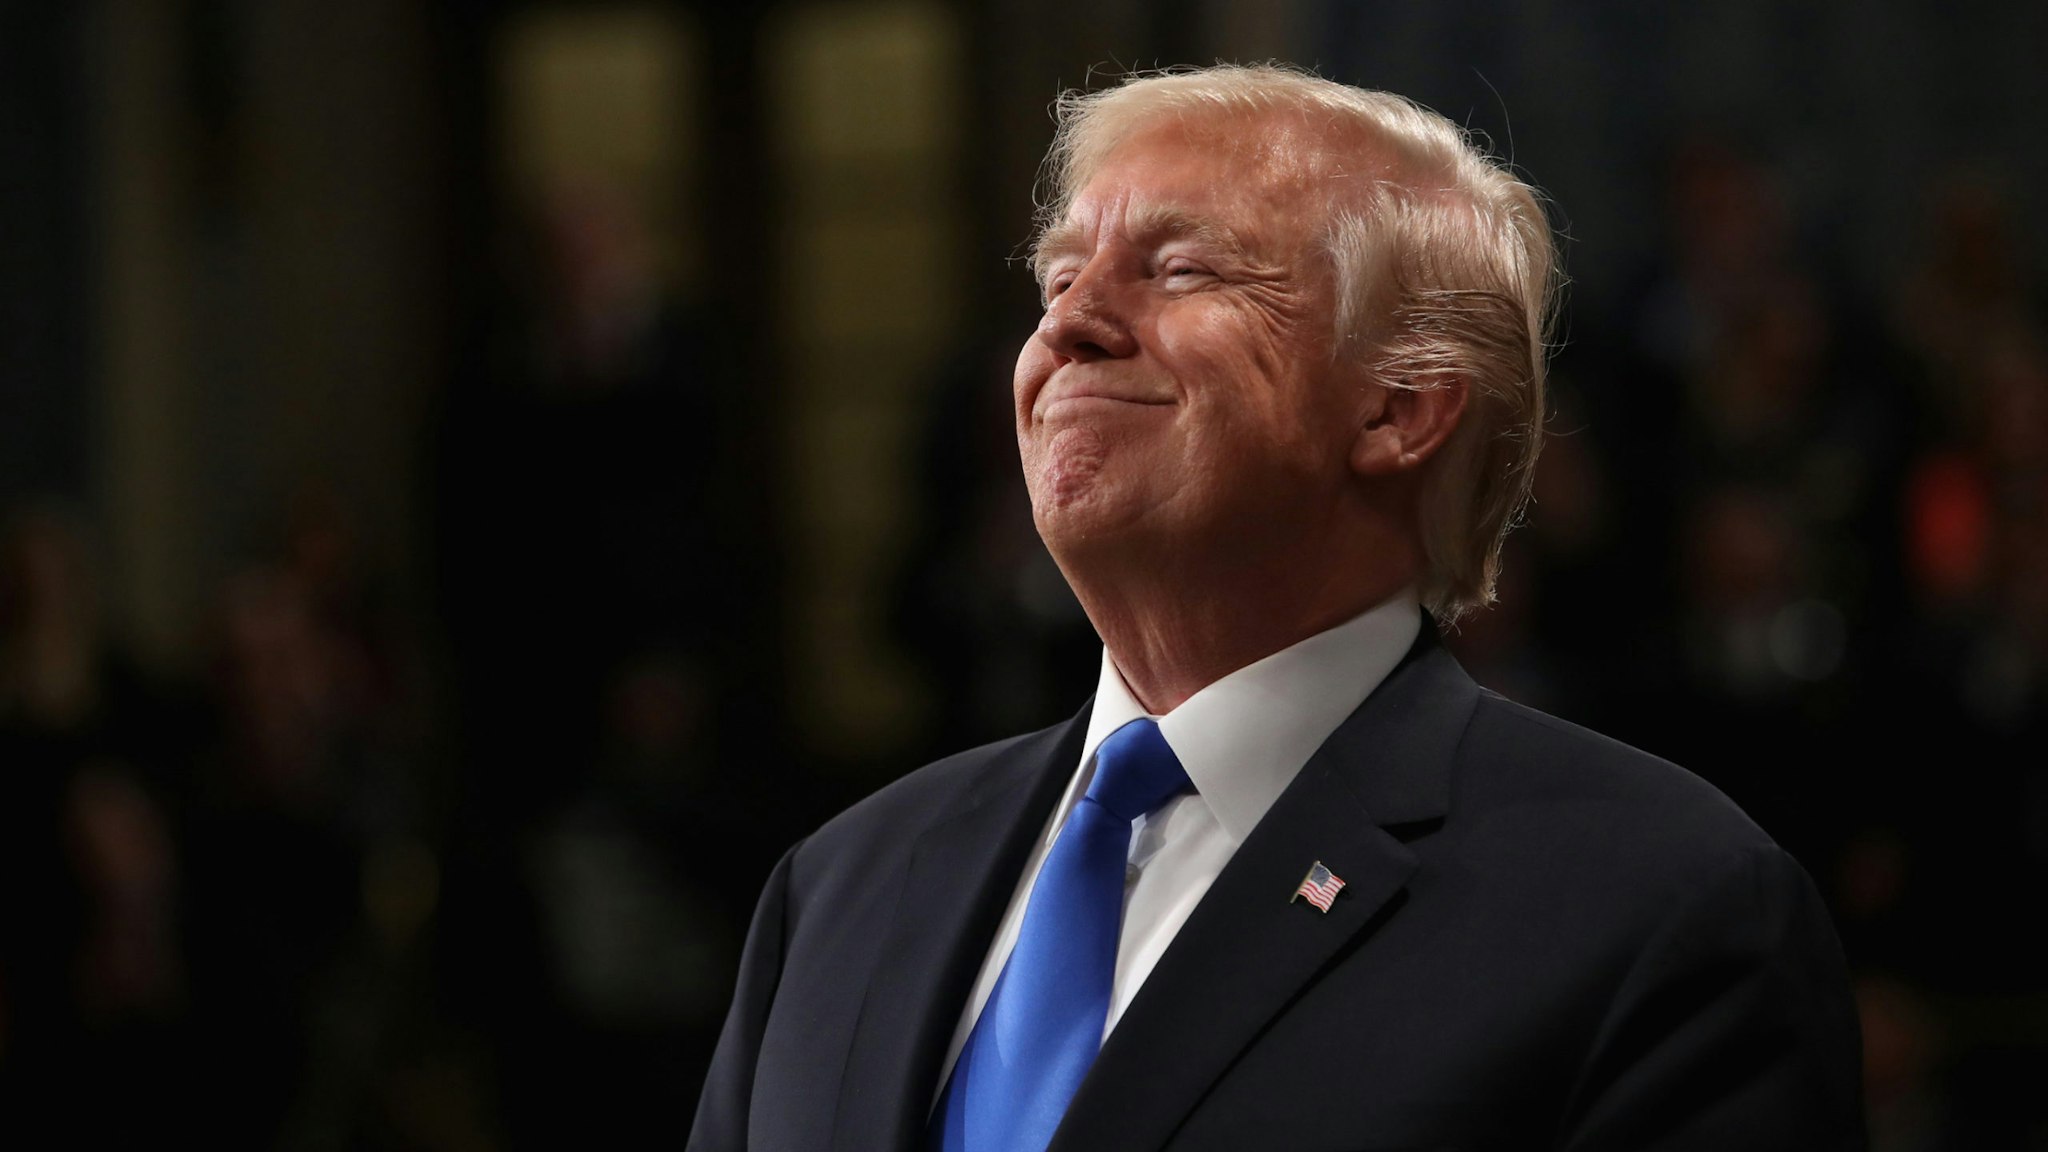 U.S. President Donald J. Trump smiles during the State of the Union address in the chamber of the U.S. House of Representatives January 30, 2018 in Washington, DC.